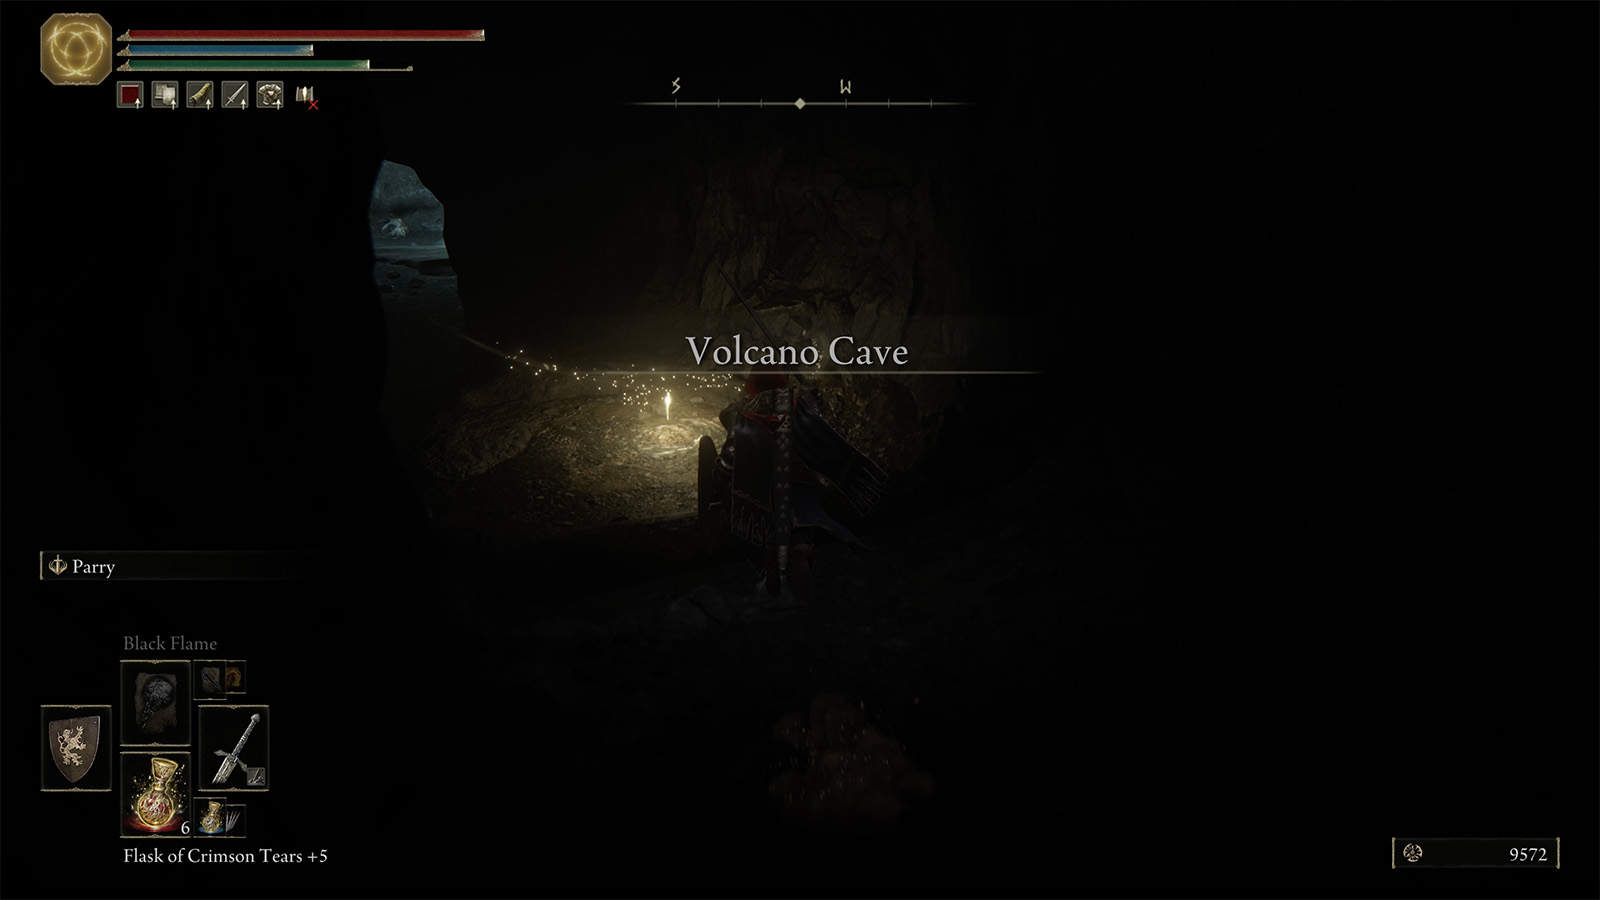 A screenshot of the entrance to Volcano Cave